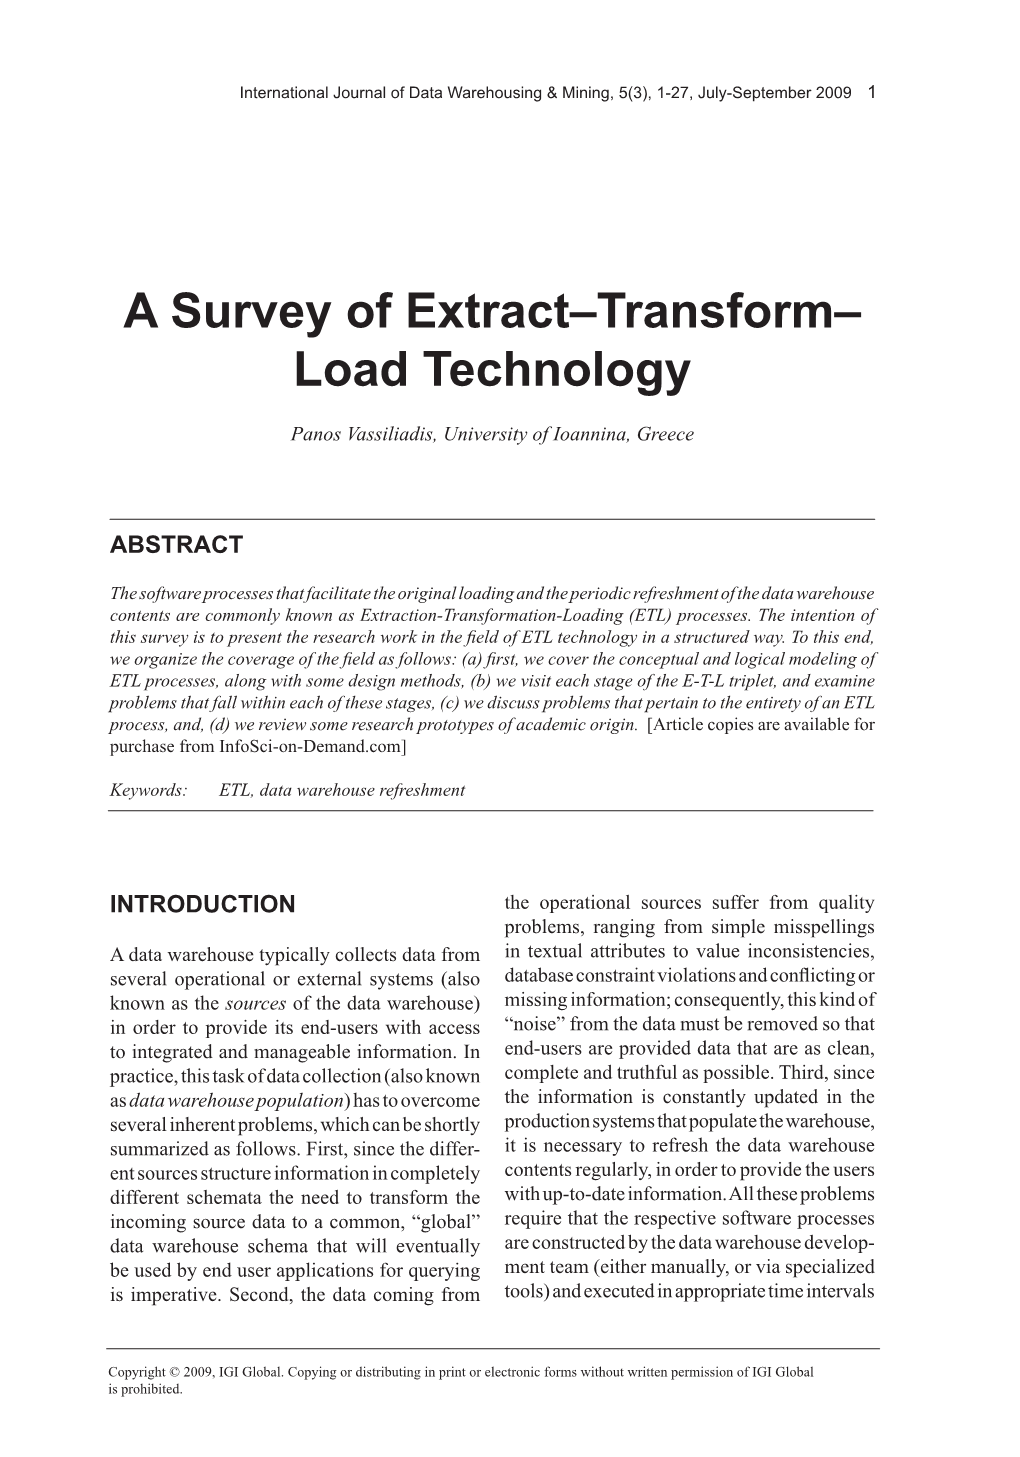 A Survey of Extract–Transform– Load Technology